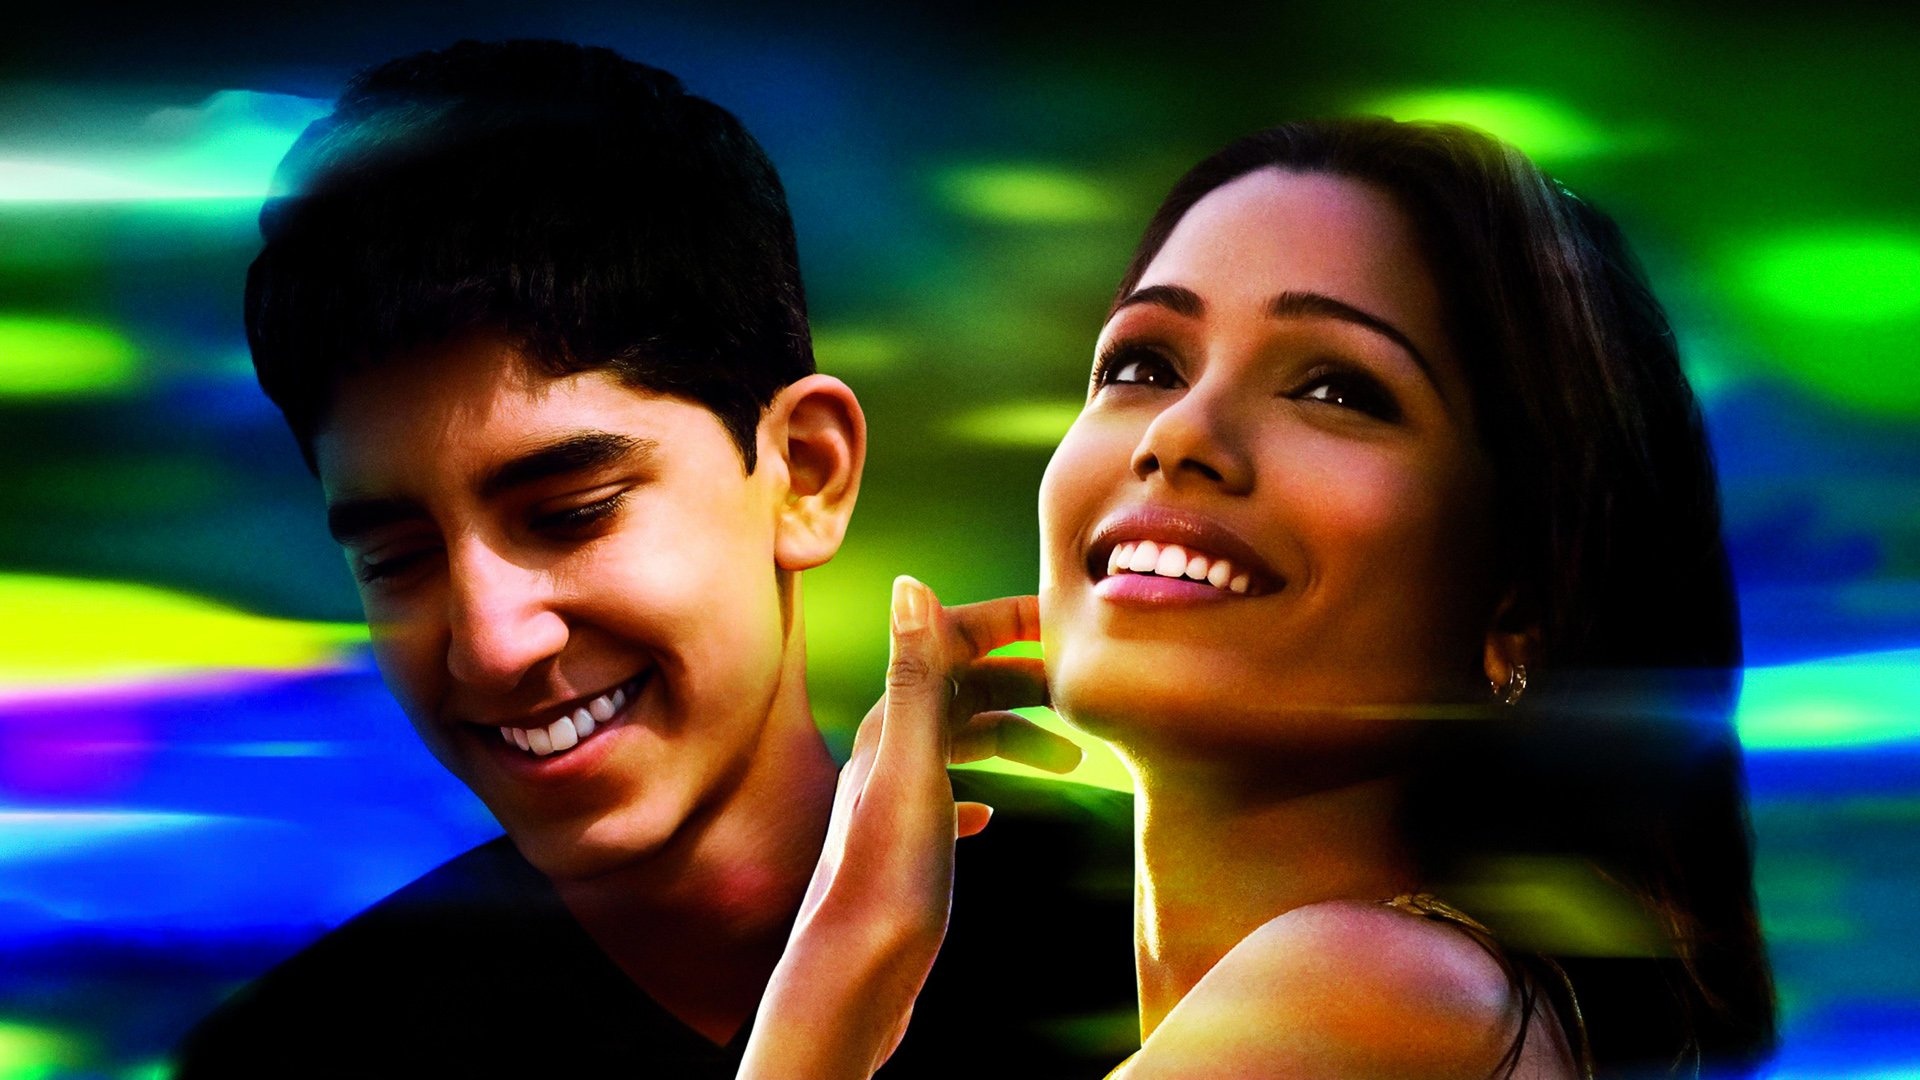 Slumdog Millionaire: The film was nominated for ten Academy Awards in 2009 and won eight. 1920x1080 Full HD Wallpaper.